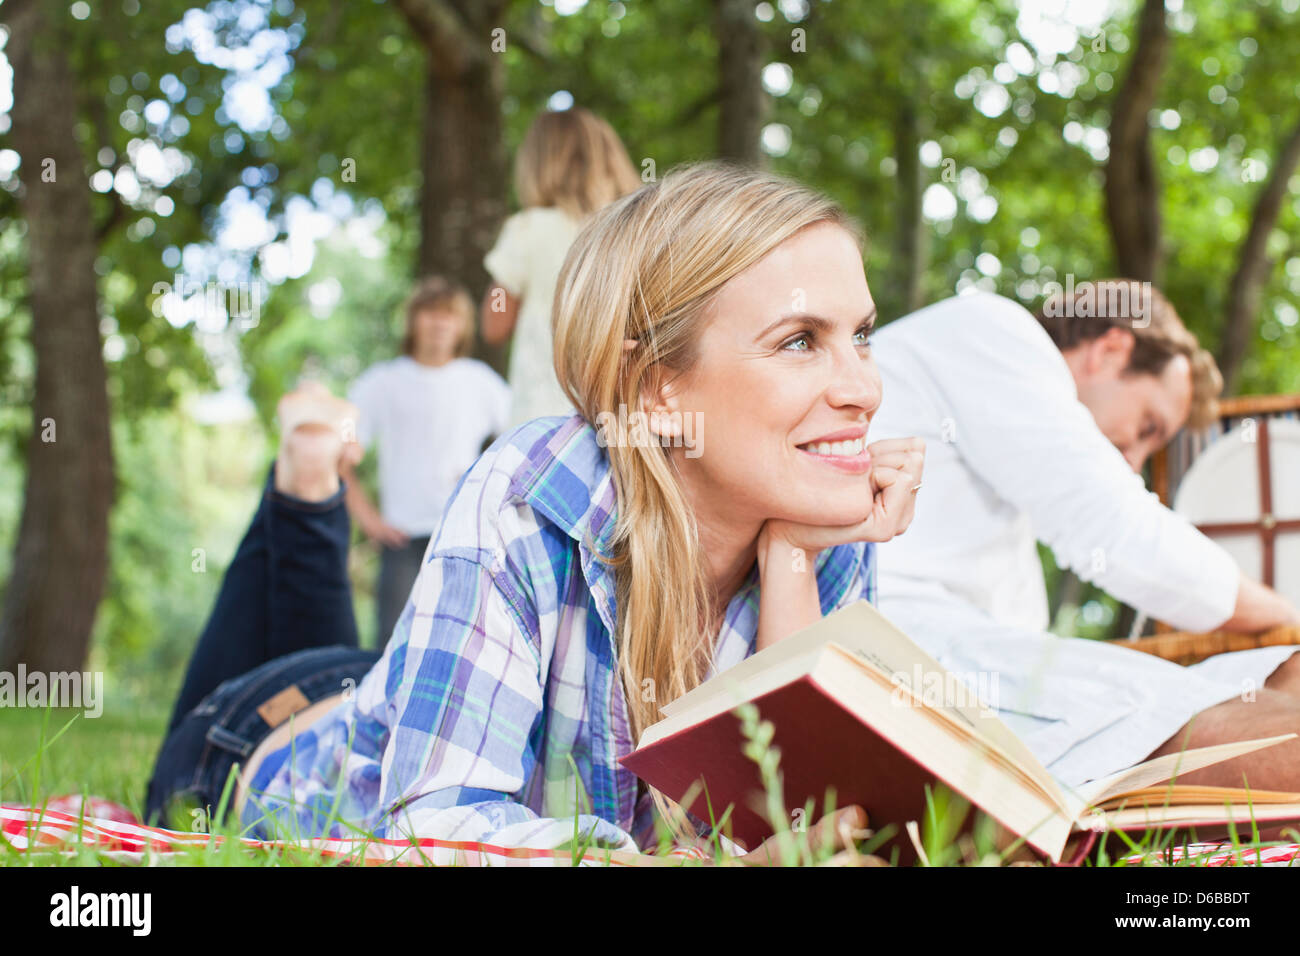 Woman reading on blanket in park Stock Photo